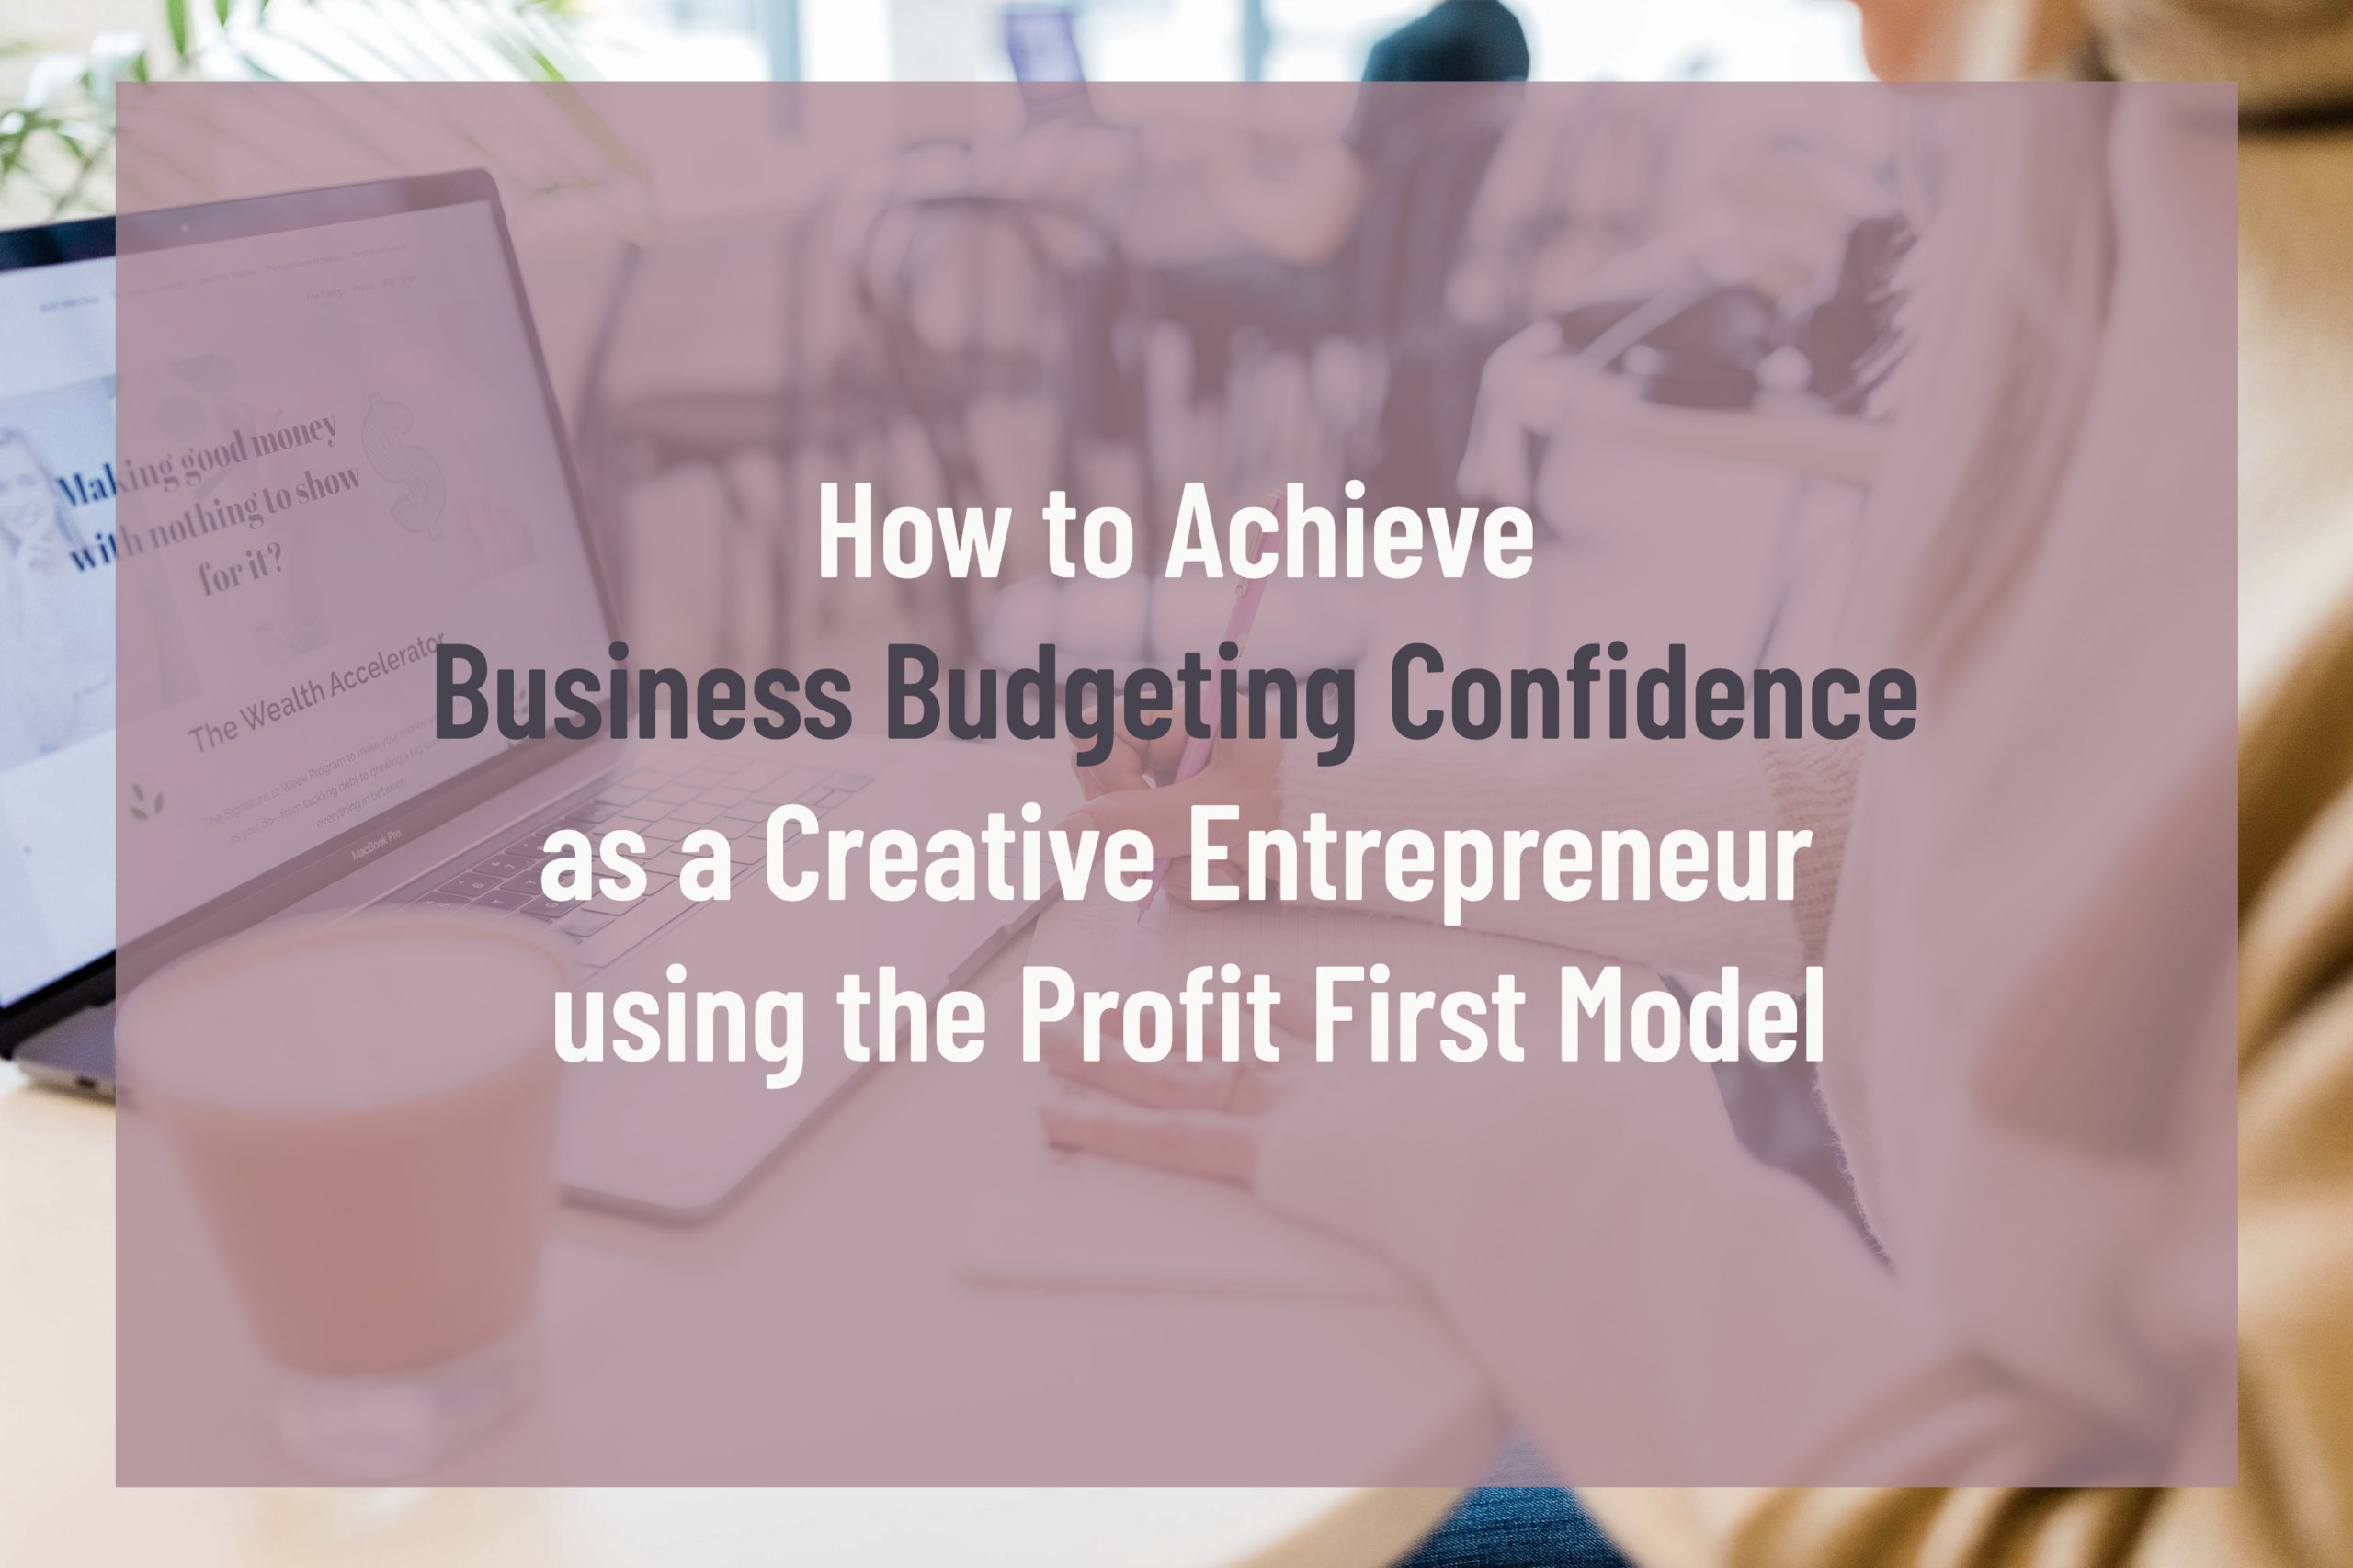 Achieve business budgeting confidence using the profit first method